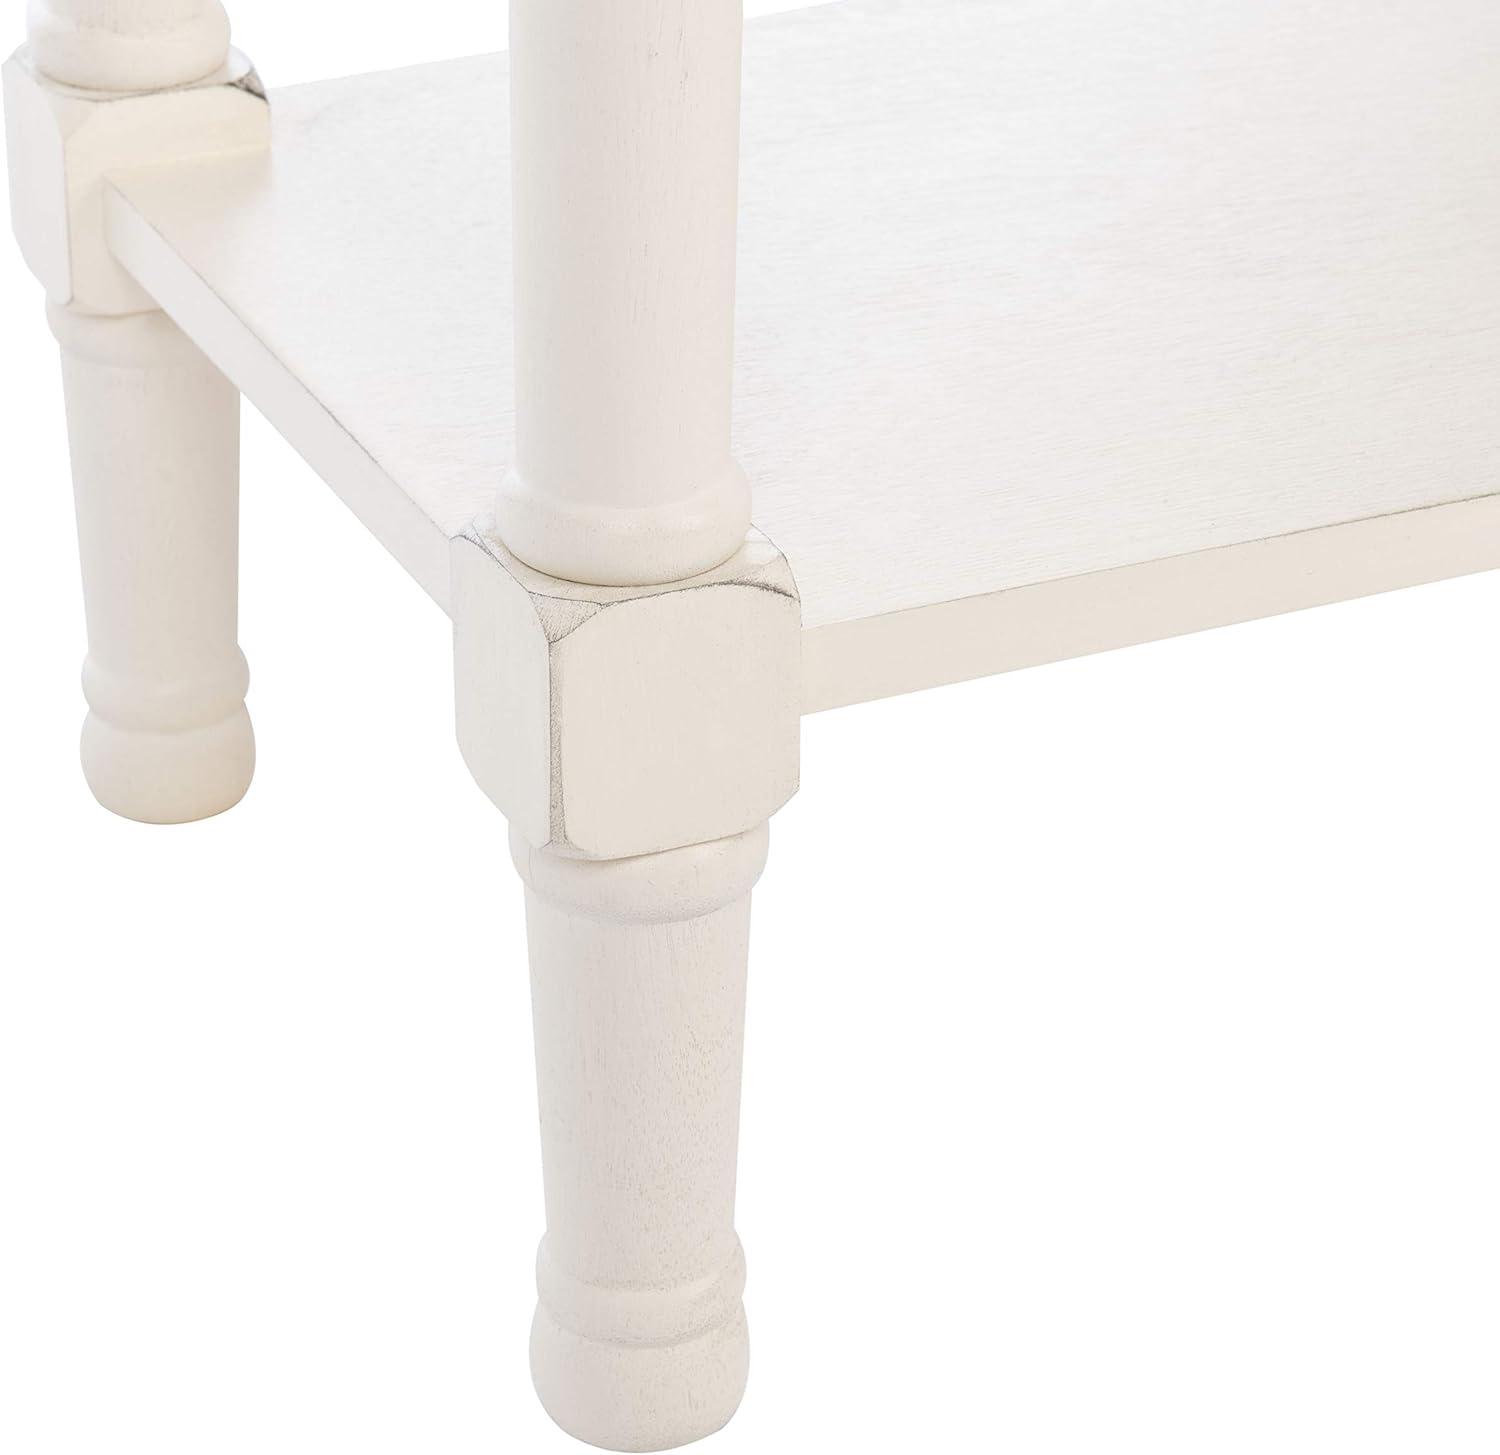 Ryder Distressed White 2-Drawer Console Table with Shelf